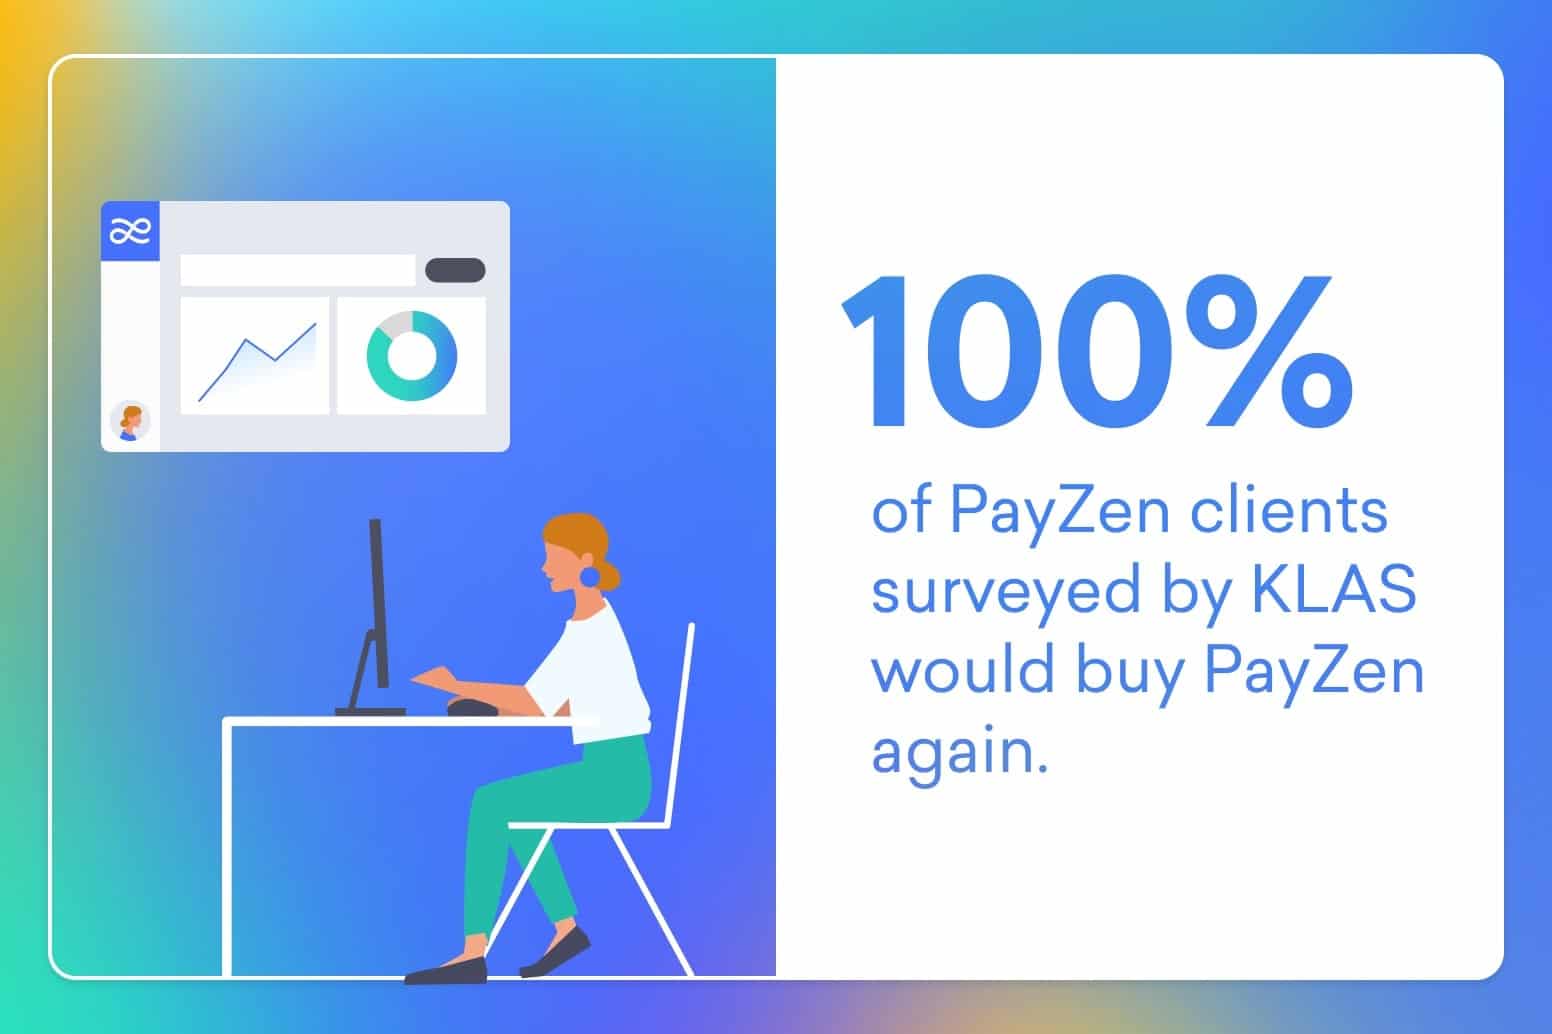 PayZen Recognized as Emerging Healthcare Affordability Solution